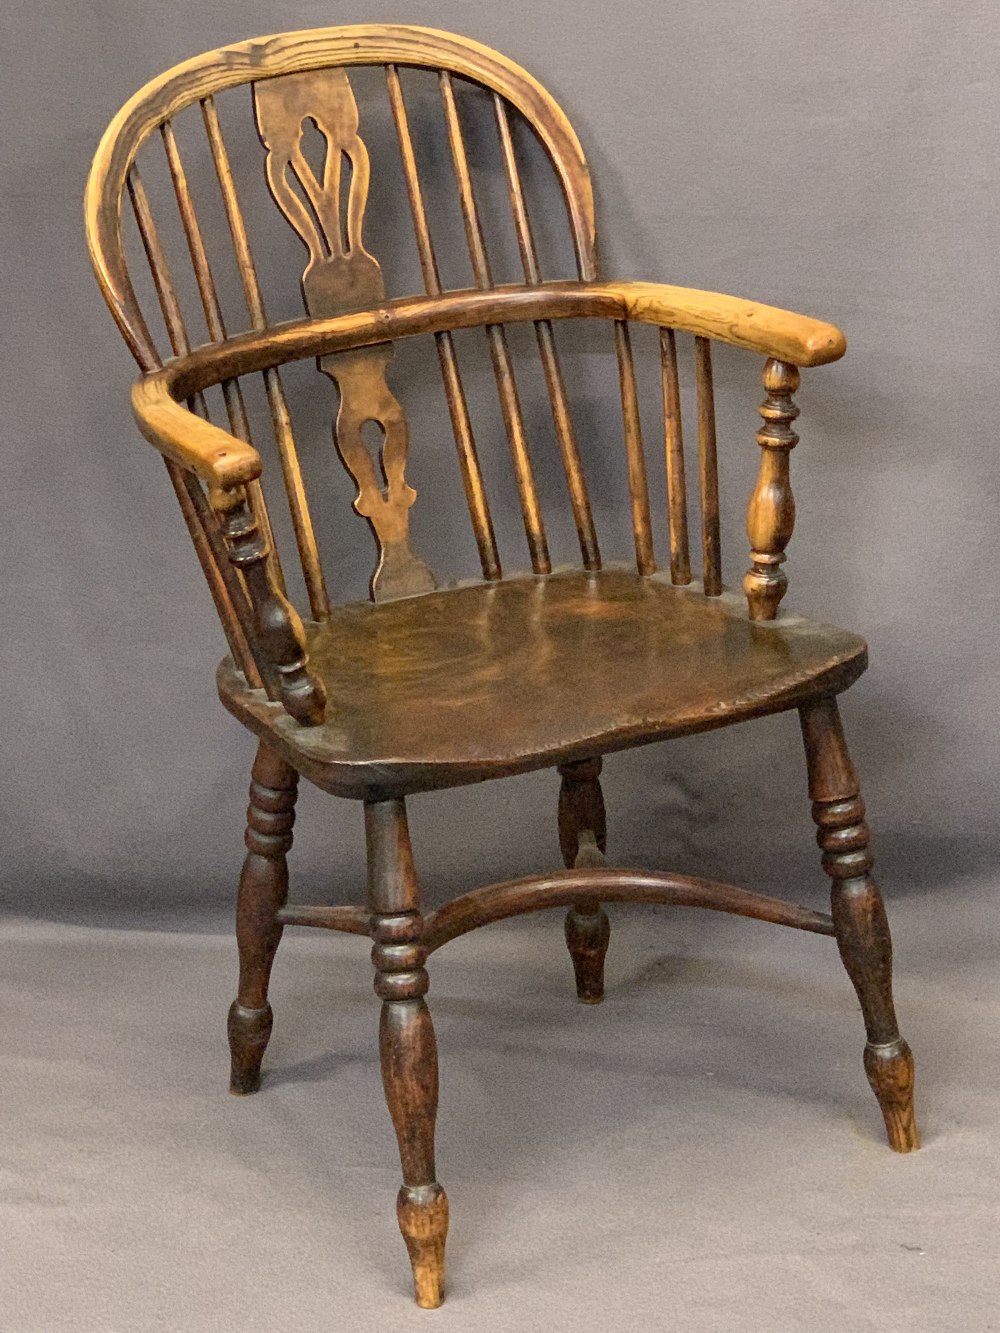 CIRCA 1840 ASH & ELM WINDSOR ARMCHAIR with crinoline stretcher, good warm colour and wear having a - Image 2 of 3